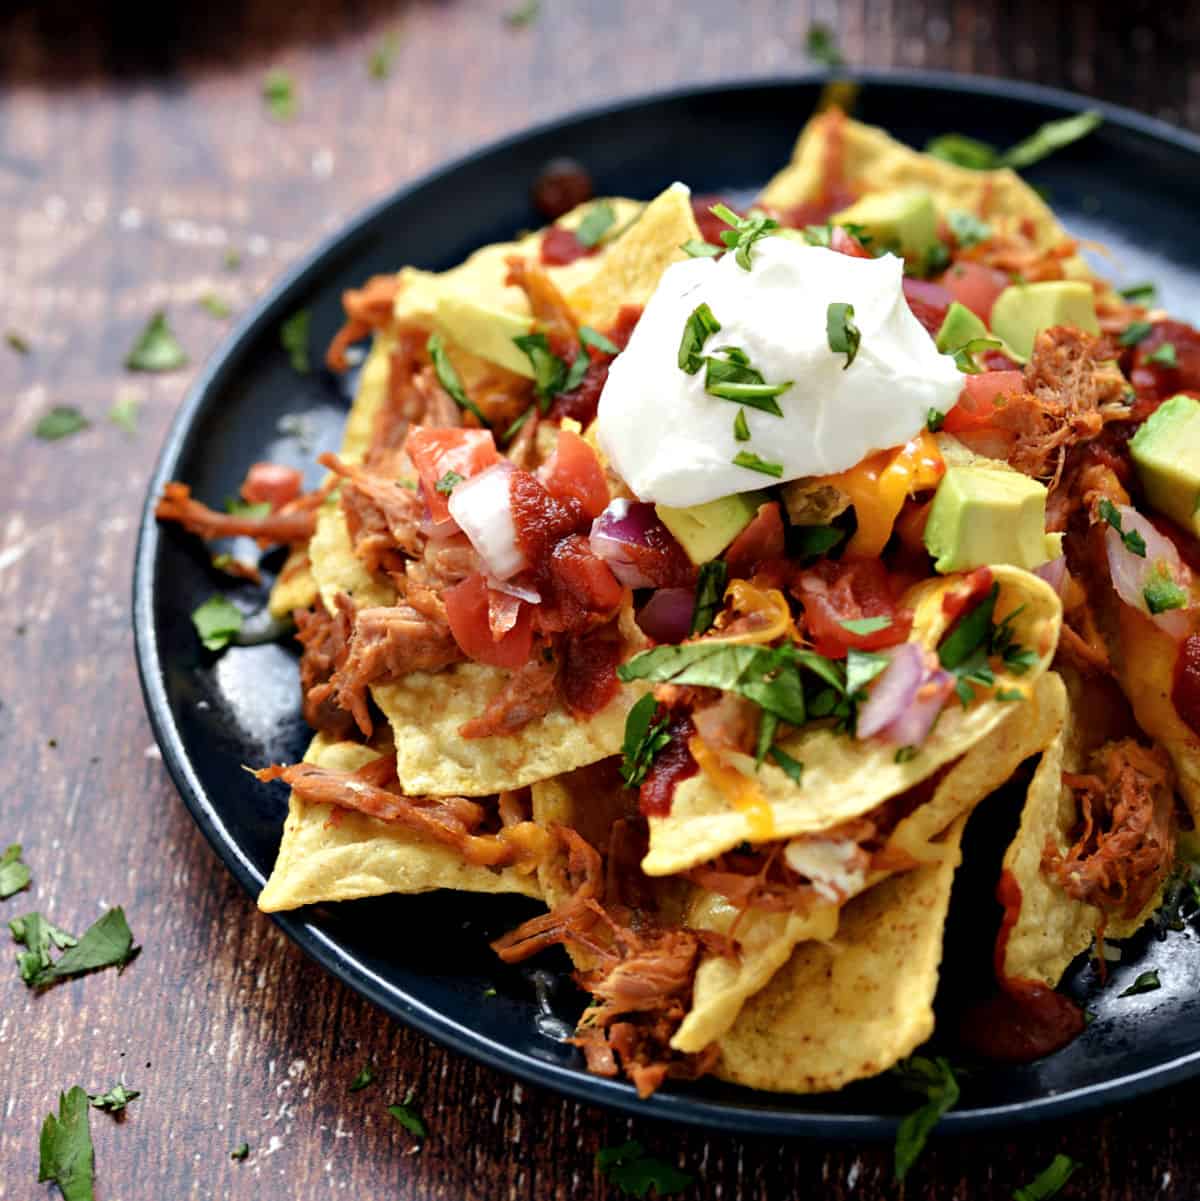 Tortilla chips, melted cheese, pulled pork, pico de gallo, avocado chunks, sour cream and cilantro piled up on a blue plate.